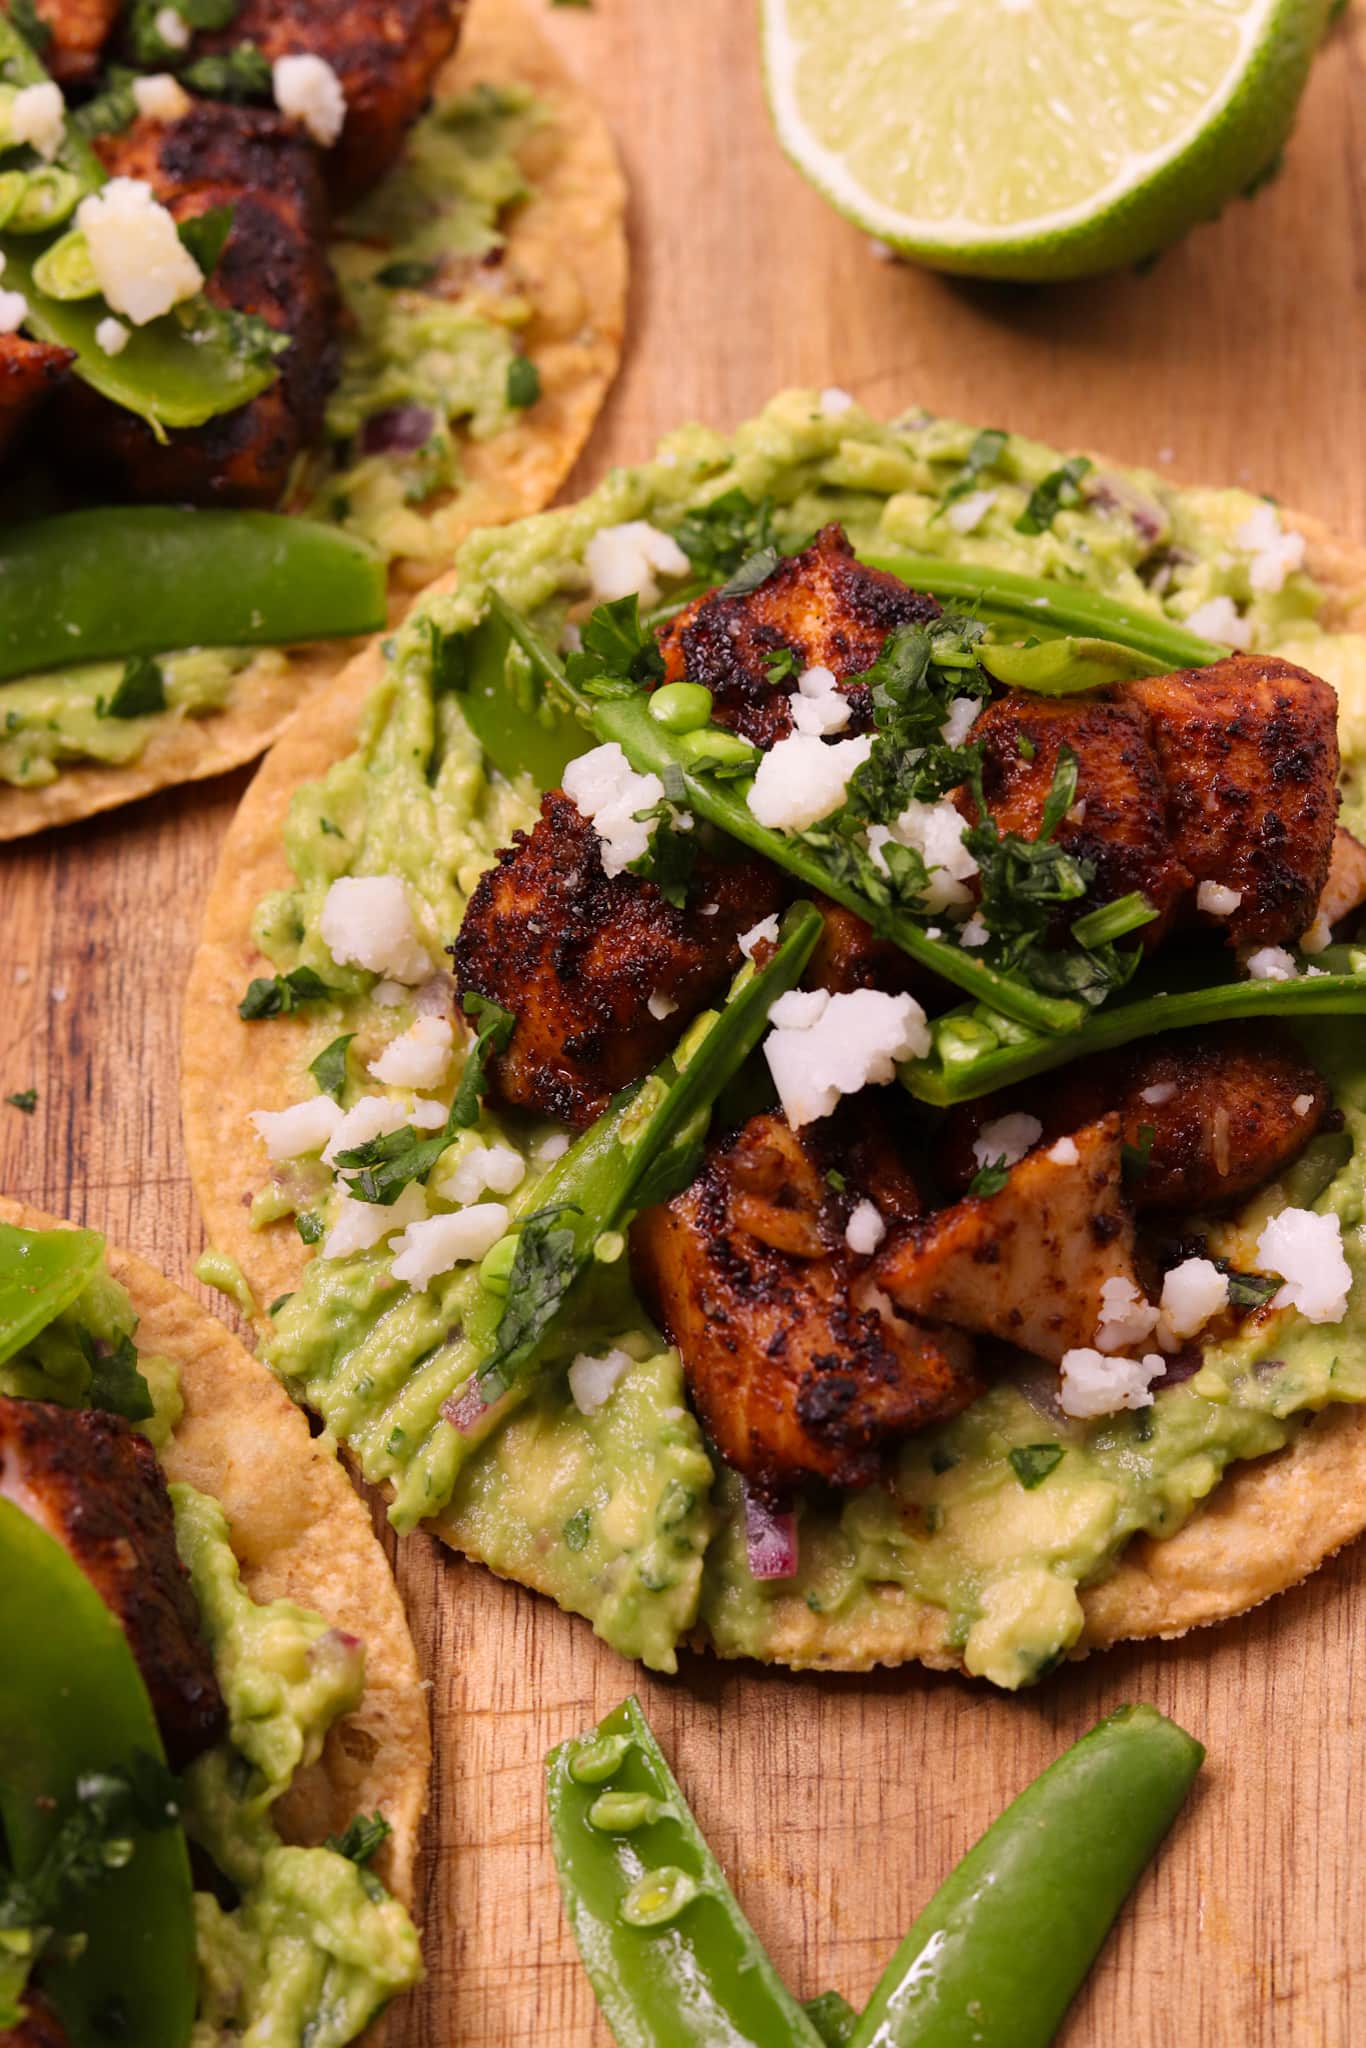 Smoky Chipotle Salmon Tostadas with Quick-Pickled Snap Peas